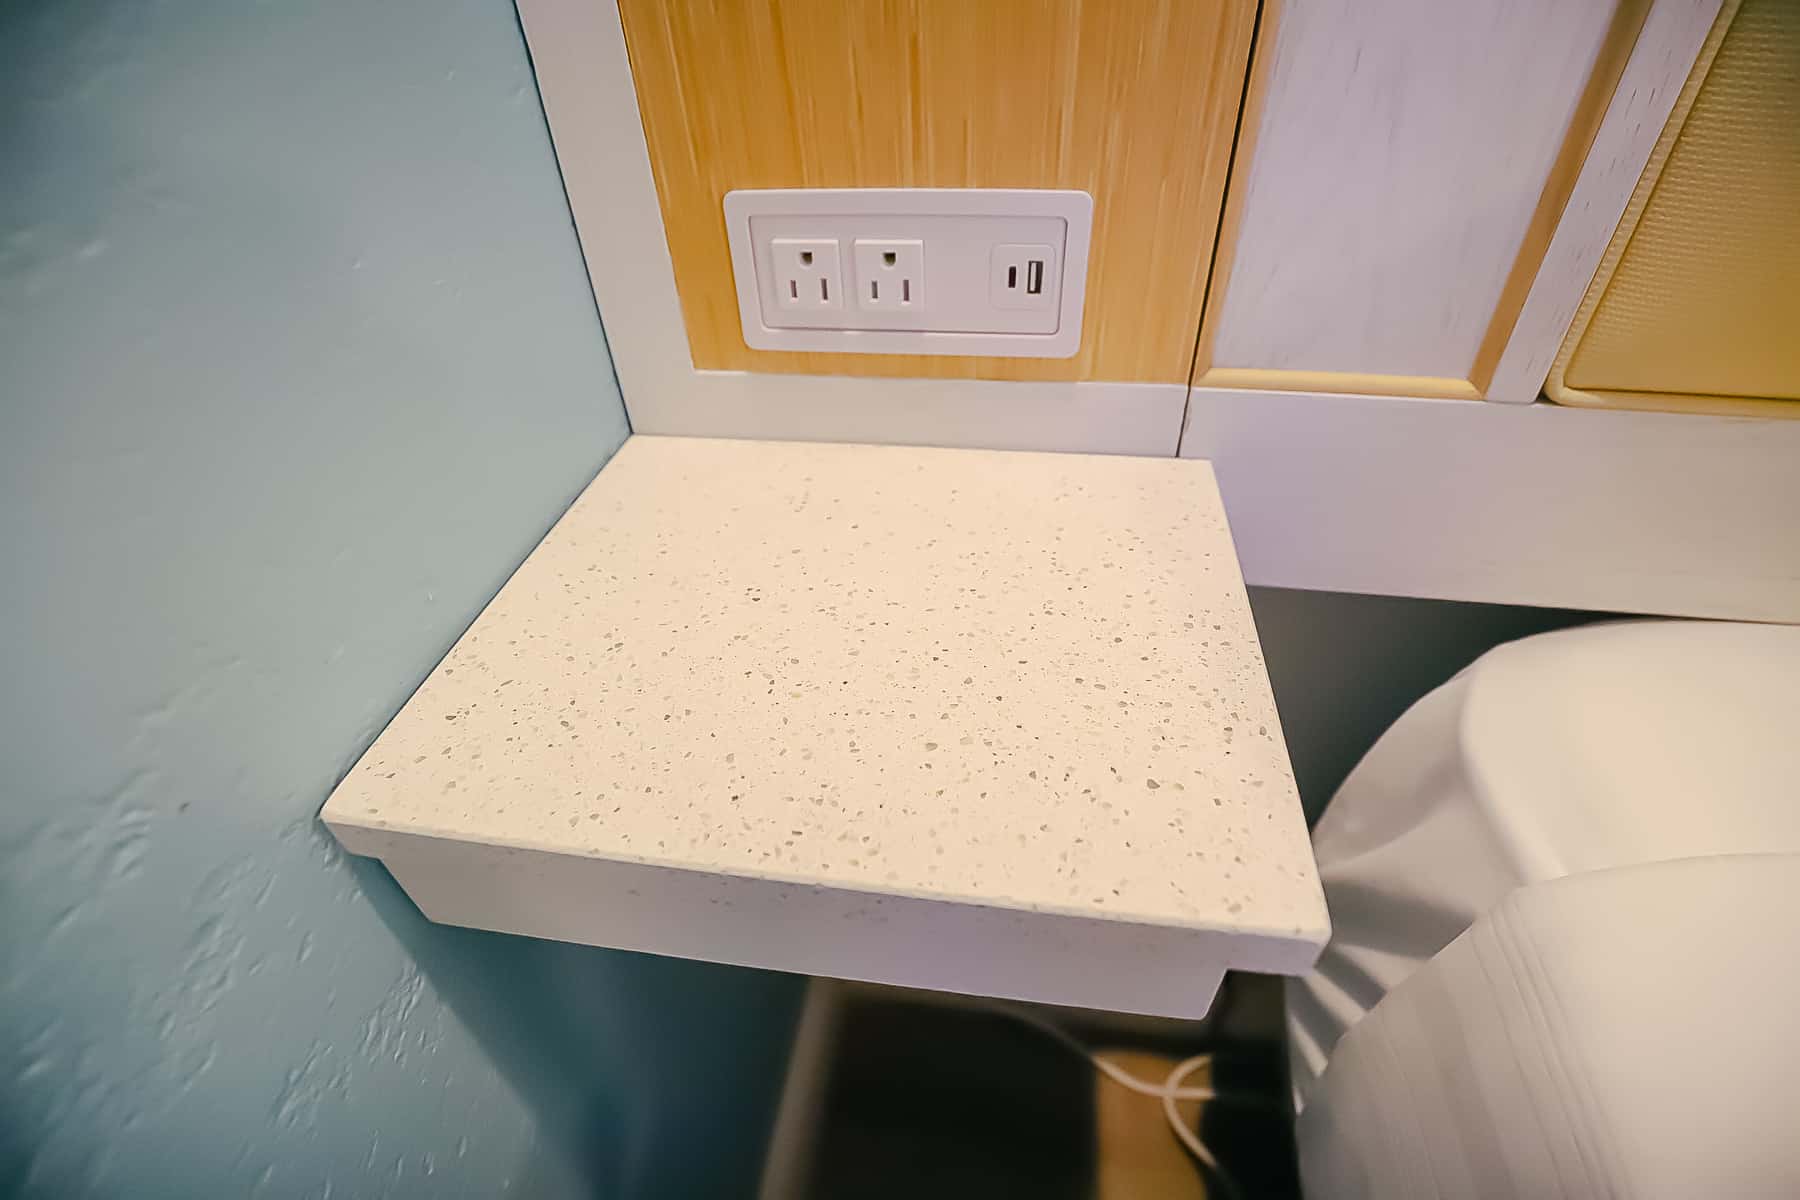 A small counter top built in to the wall on one side of the bed provides a place to charge your phone.